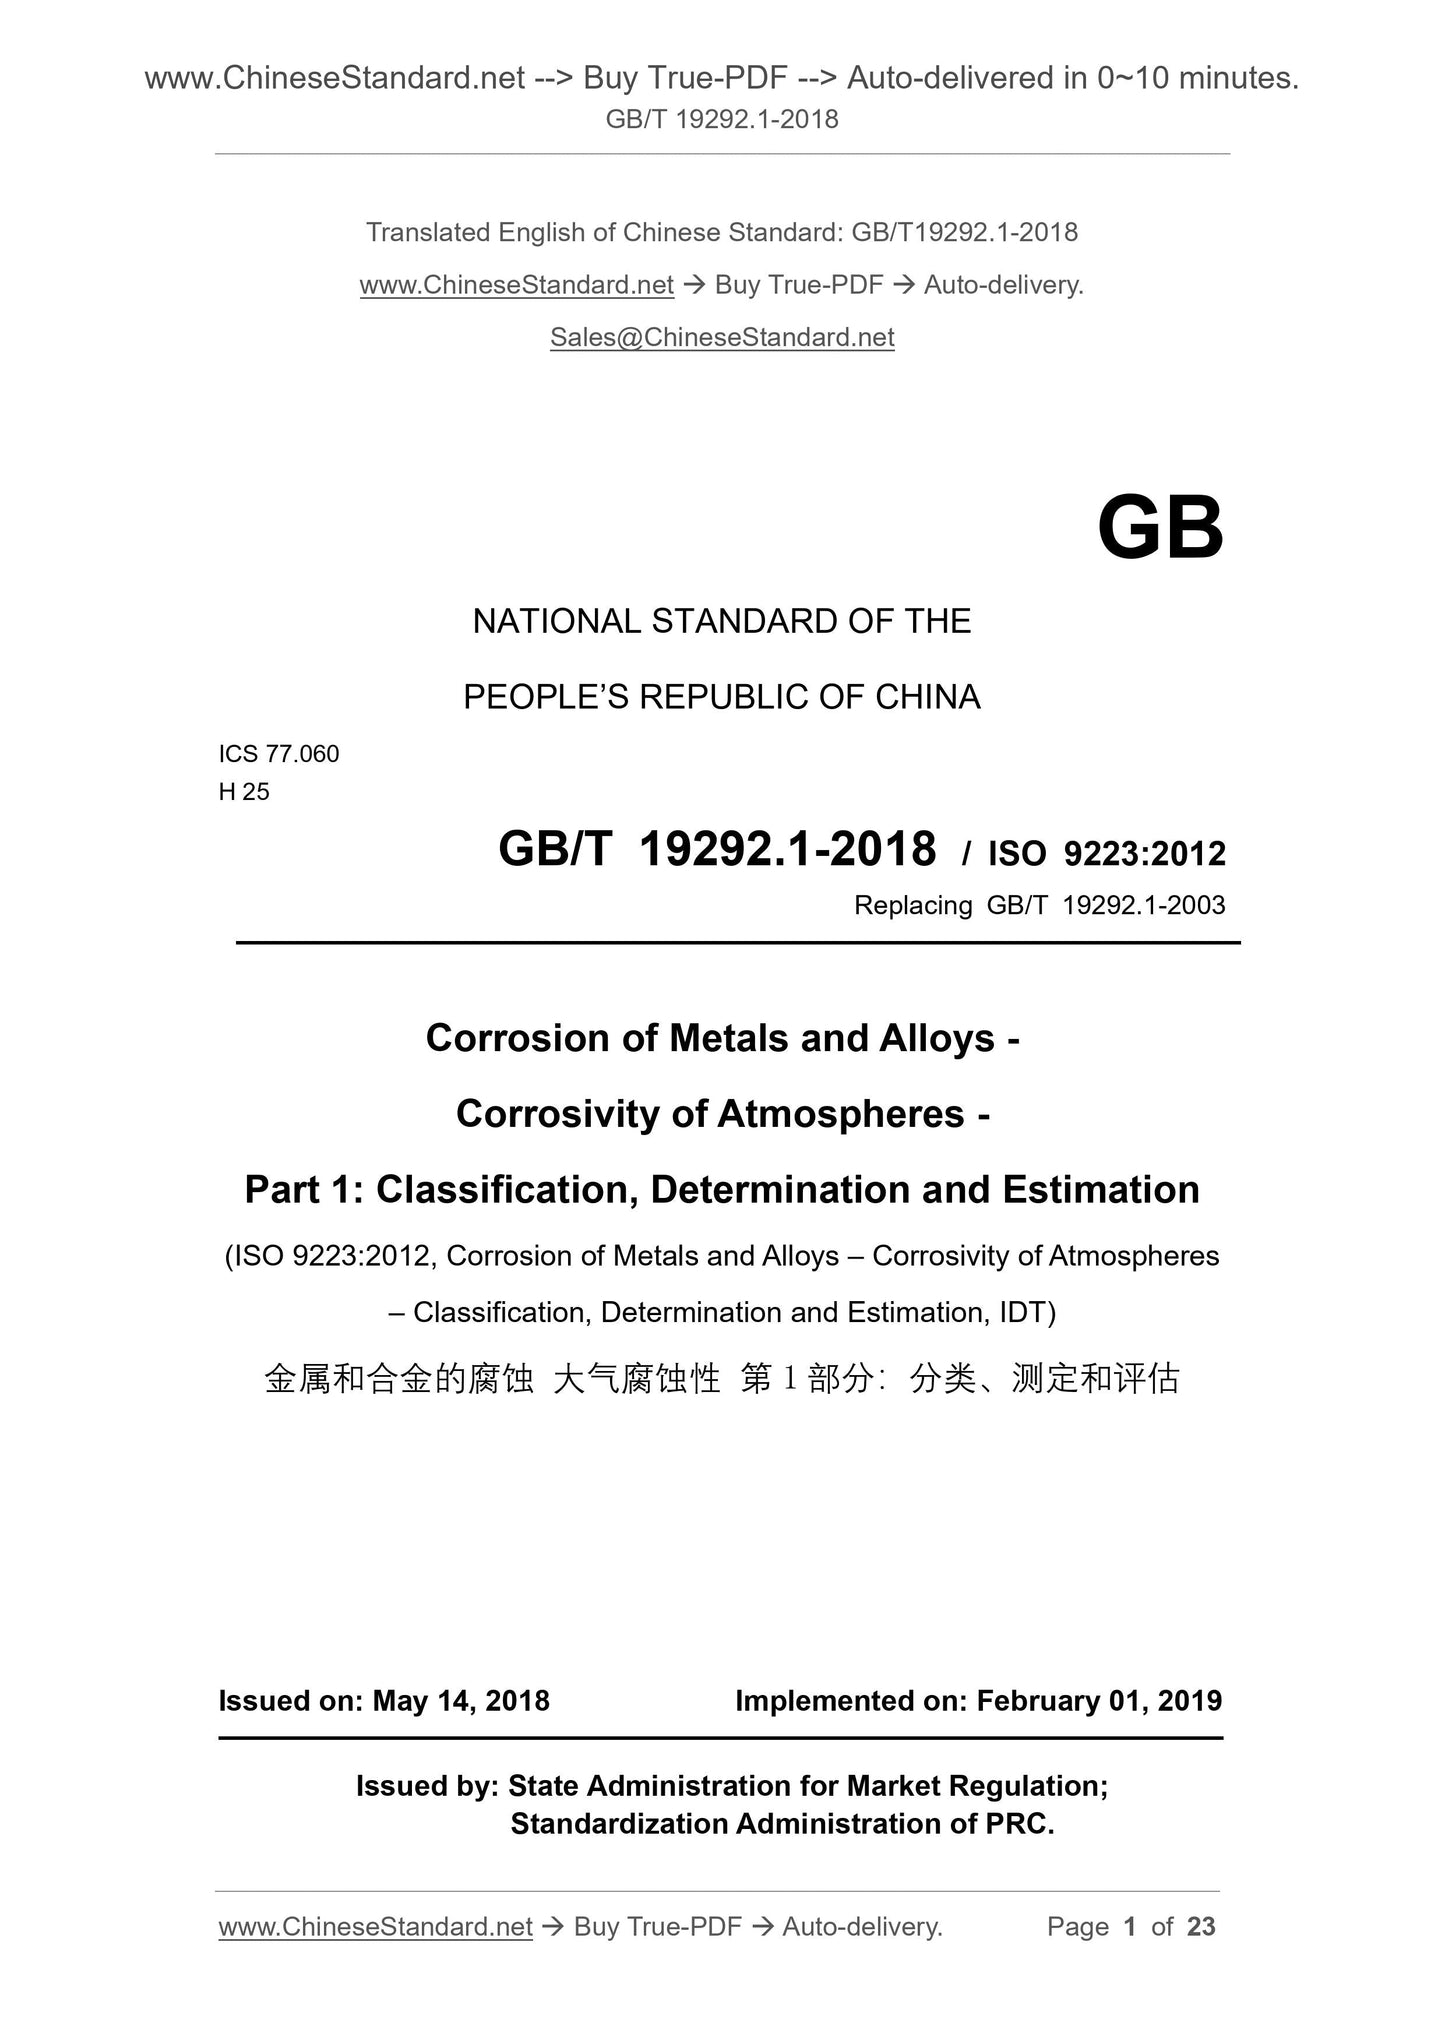 GB/T 19292.1-2018 Page 1